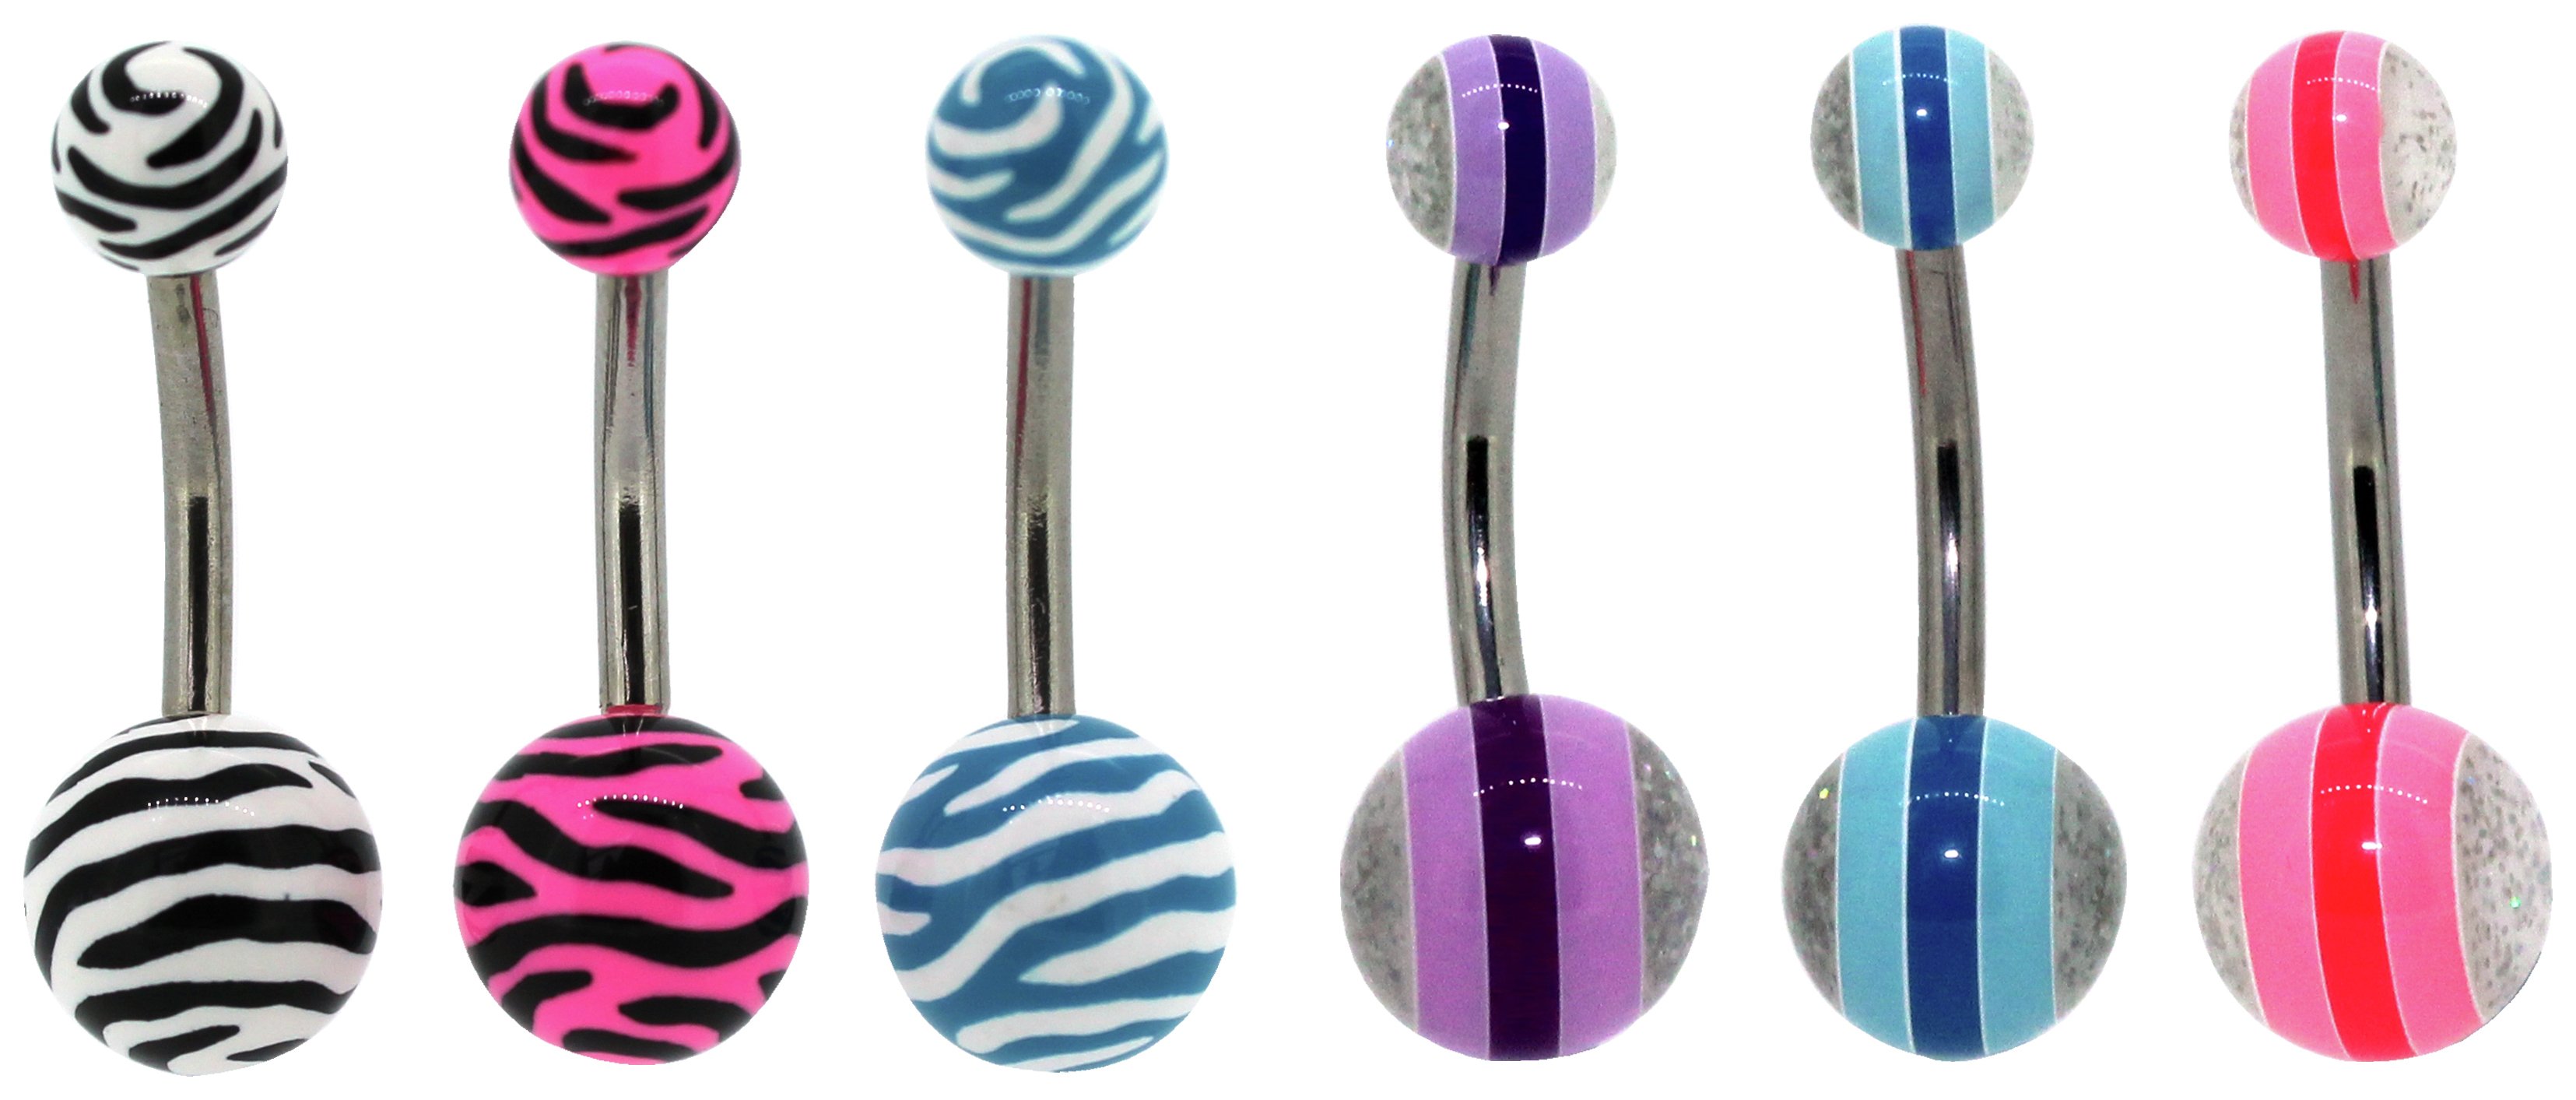 Stainless Steel Patter Balls Belly Bars - Set of 6.